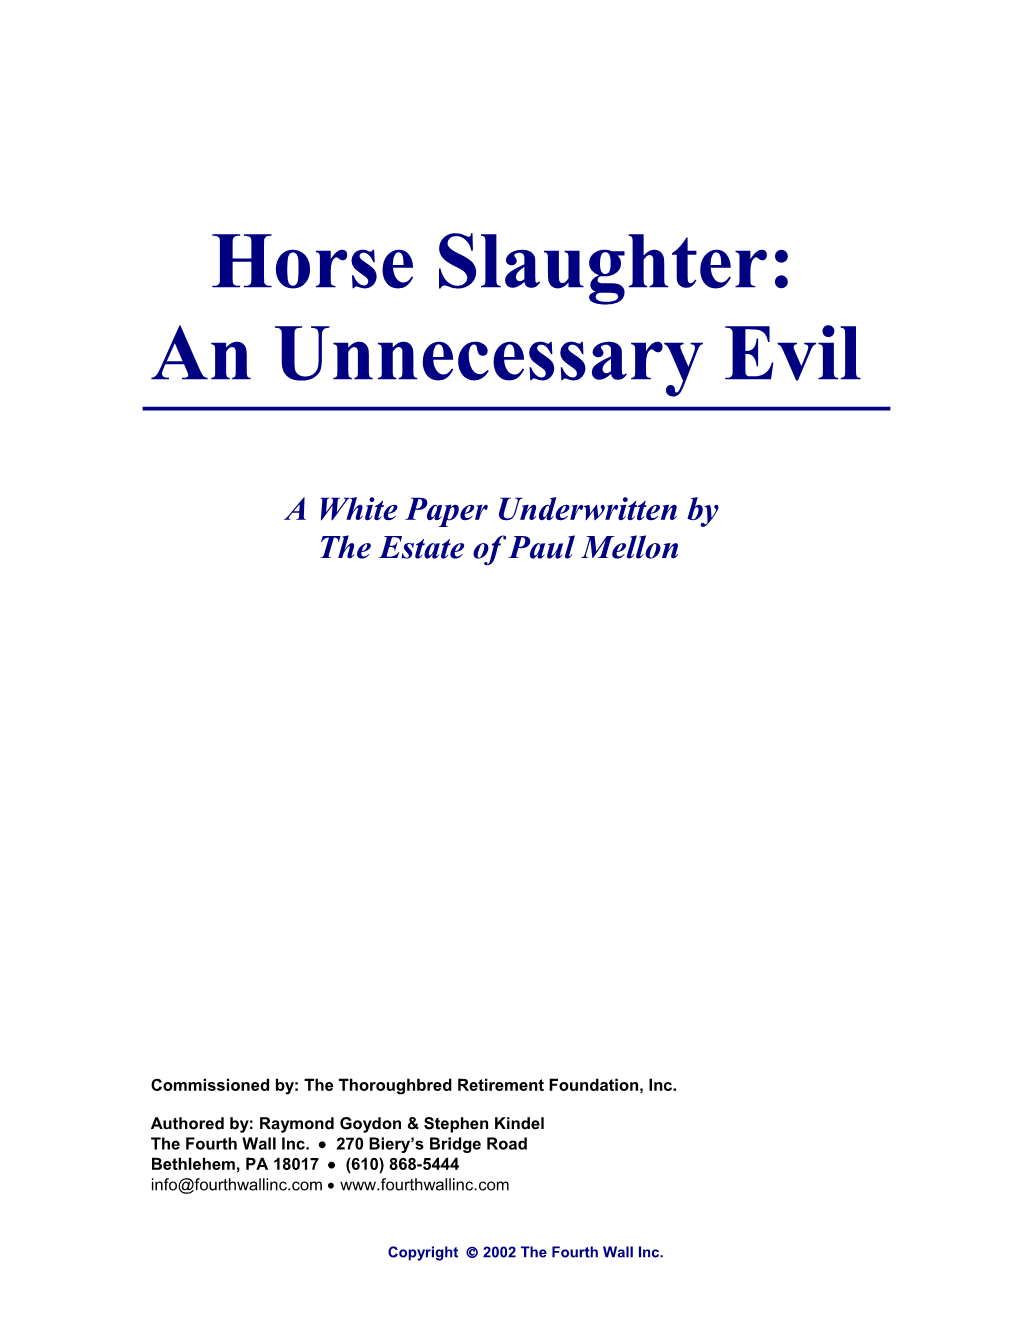 Many Americans Would Be Surprised to Learn That Horses Are Routinely Slaughtered to Provide